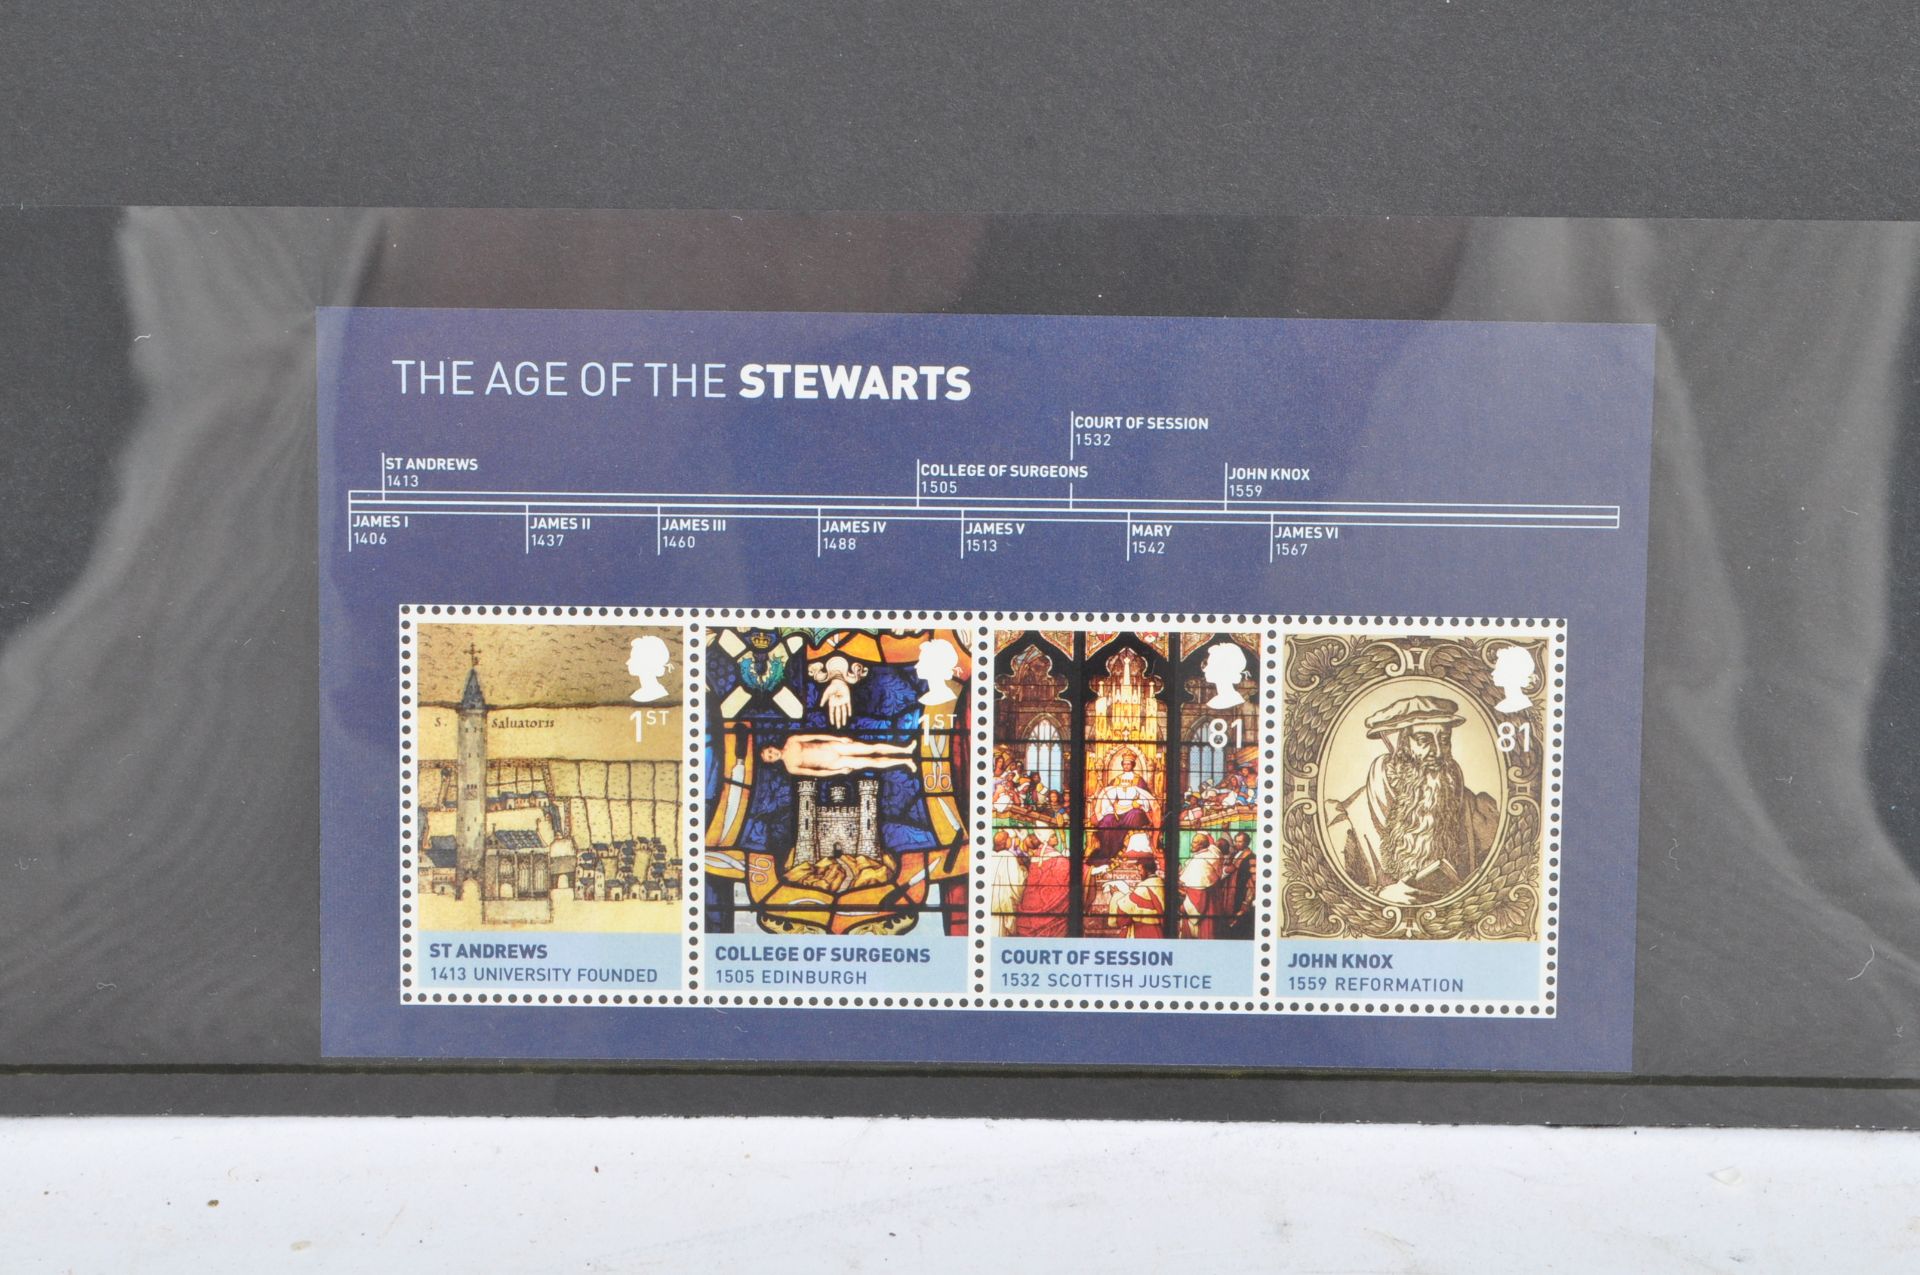 COLLECTION OF 21ST CENTURY BRITISH POSTAGE STAMPS - Image 5 of 7